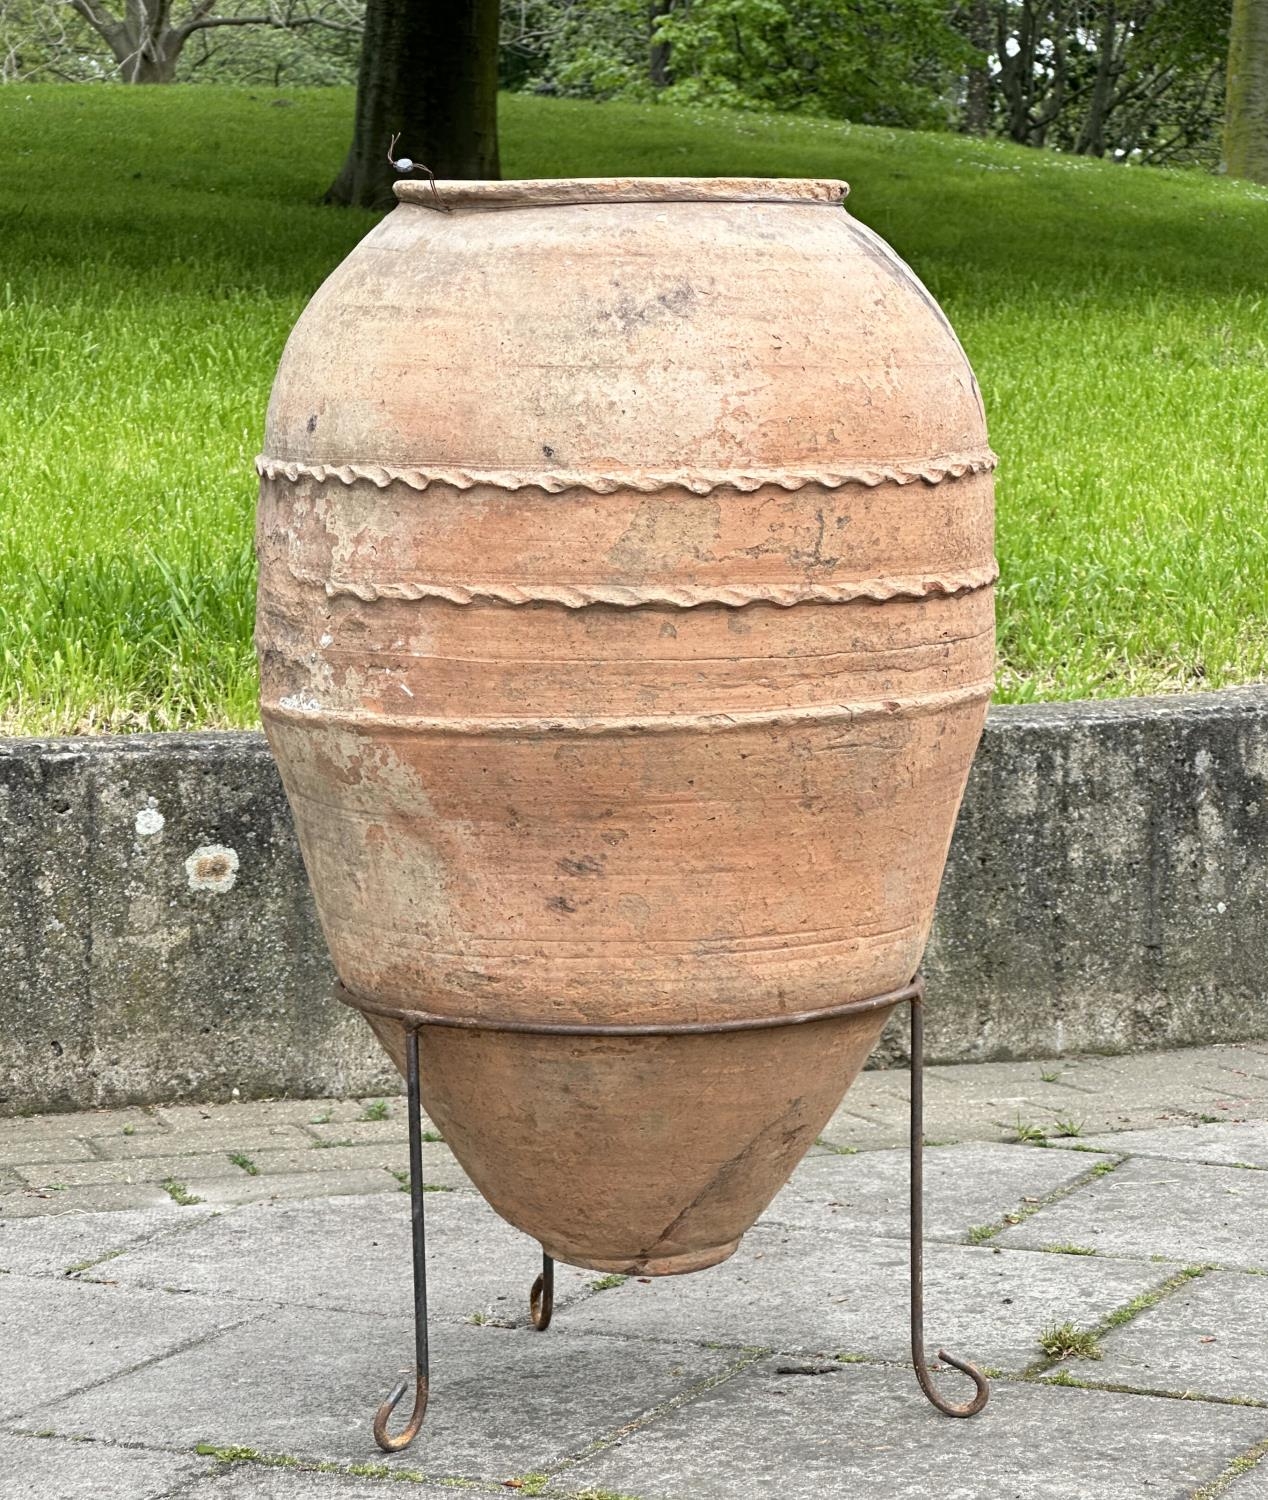 GARDEN OLIVE STYLE JAR PLANTER, well weathered terracotta, with pressed banded detail raised on - Image 4 of 8